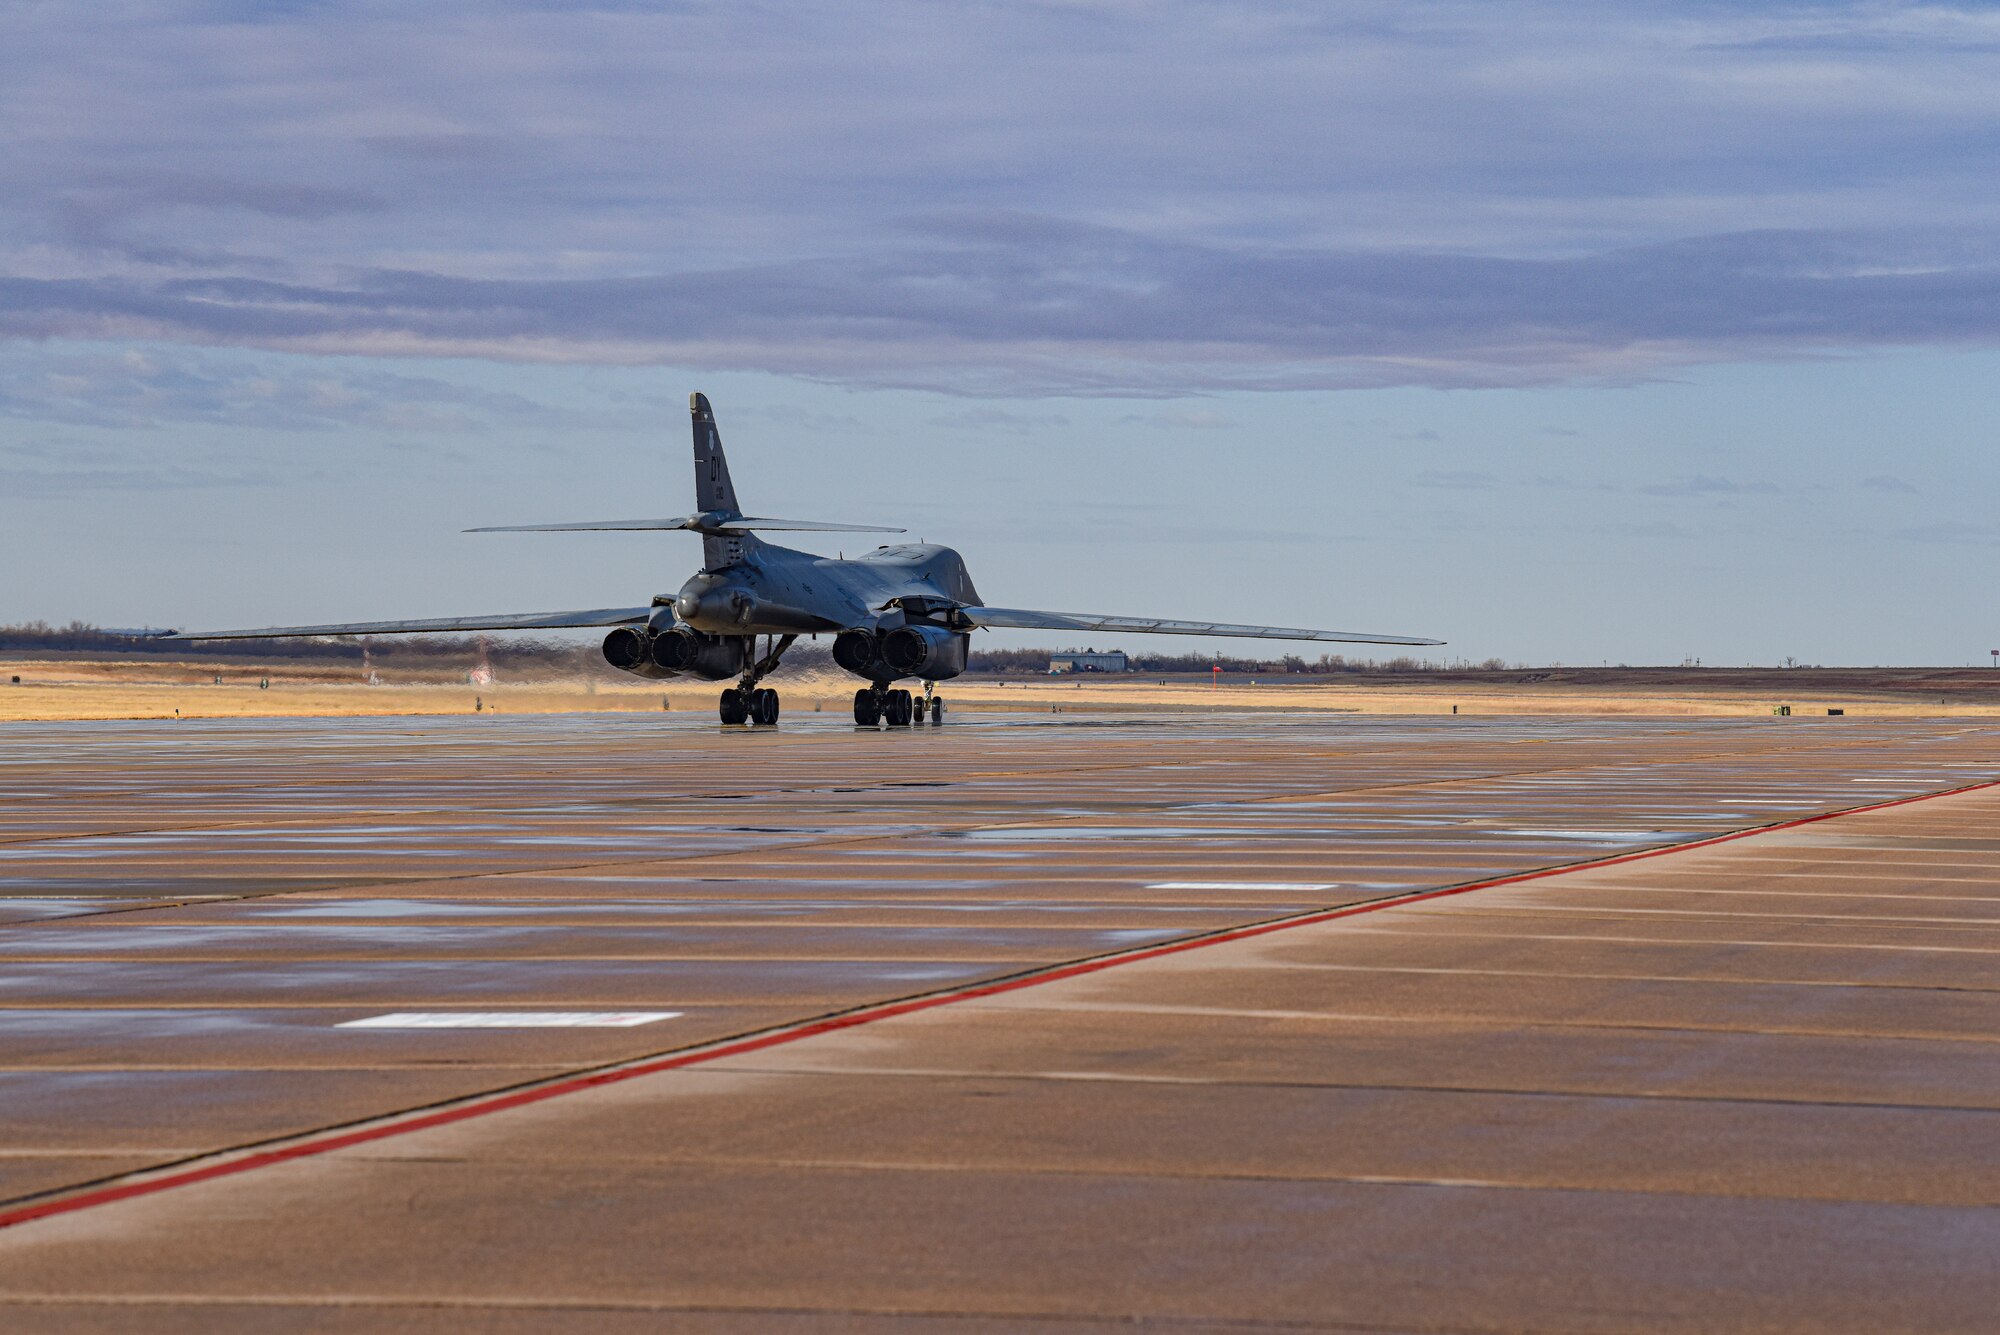 A B-1B Lancer taxis on the flightline after aircrew members completed a Continental United States to Continental United States joint Large Force Exercise alongside the Japanese Air Self-Defense Force at Dyess Air Force Base, Texas, Jan. 11, 2022. The exercise shows our allies and partners are committed to a free and open Indo-Pacific region. (U.S. Air Force photo by Airman 1st Class Ryan Hayman)